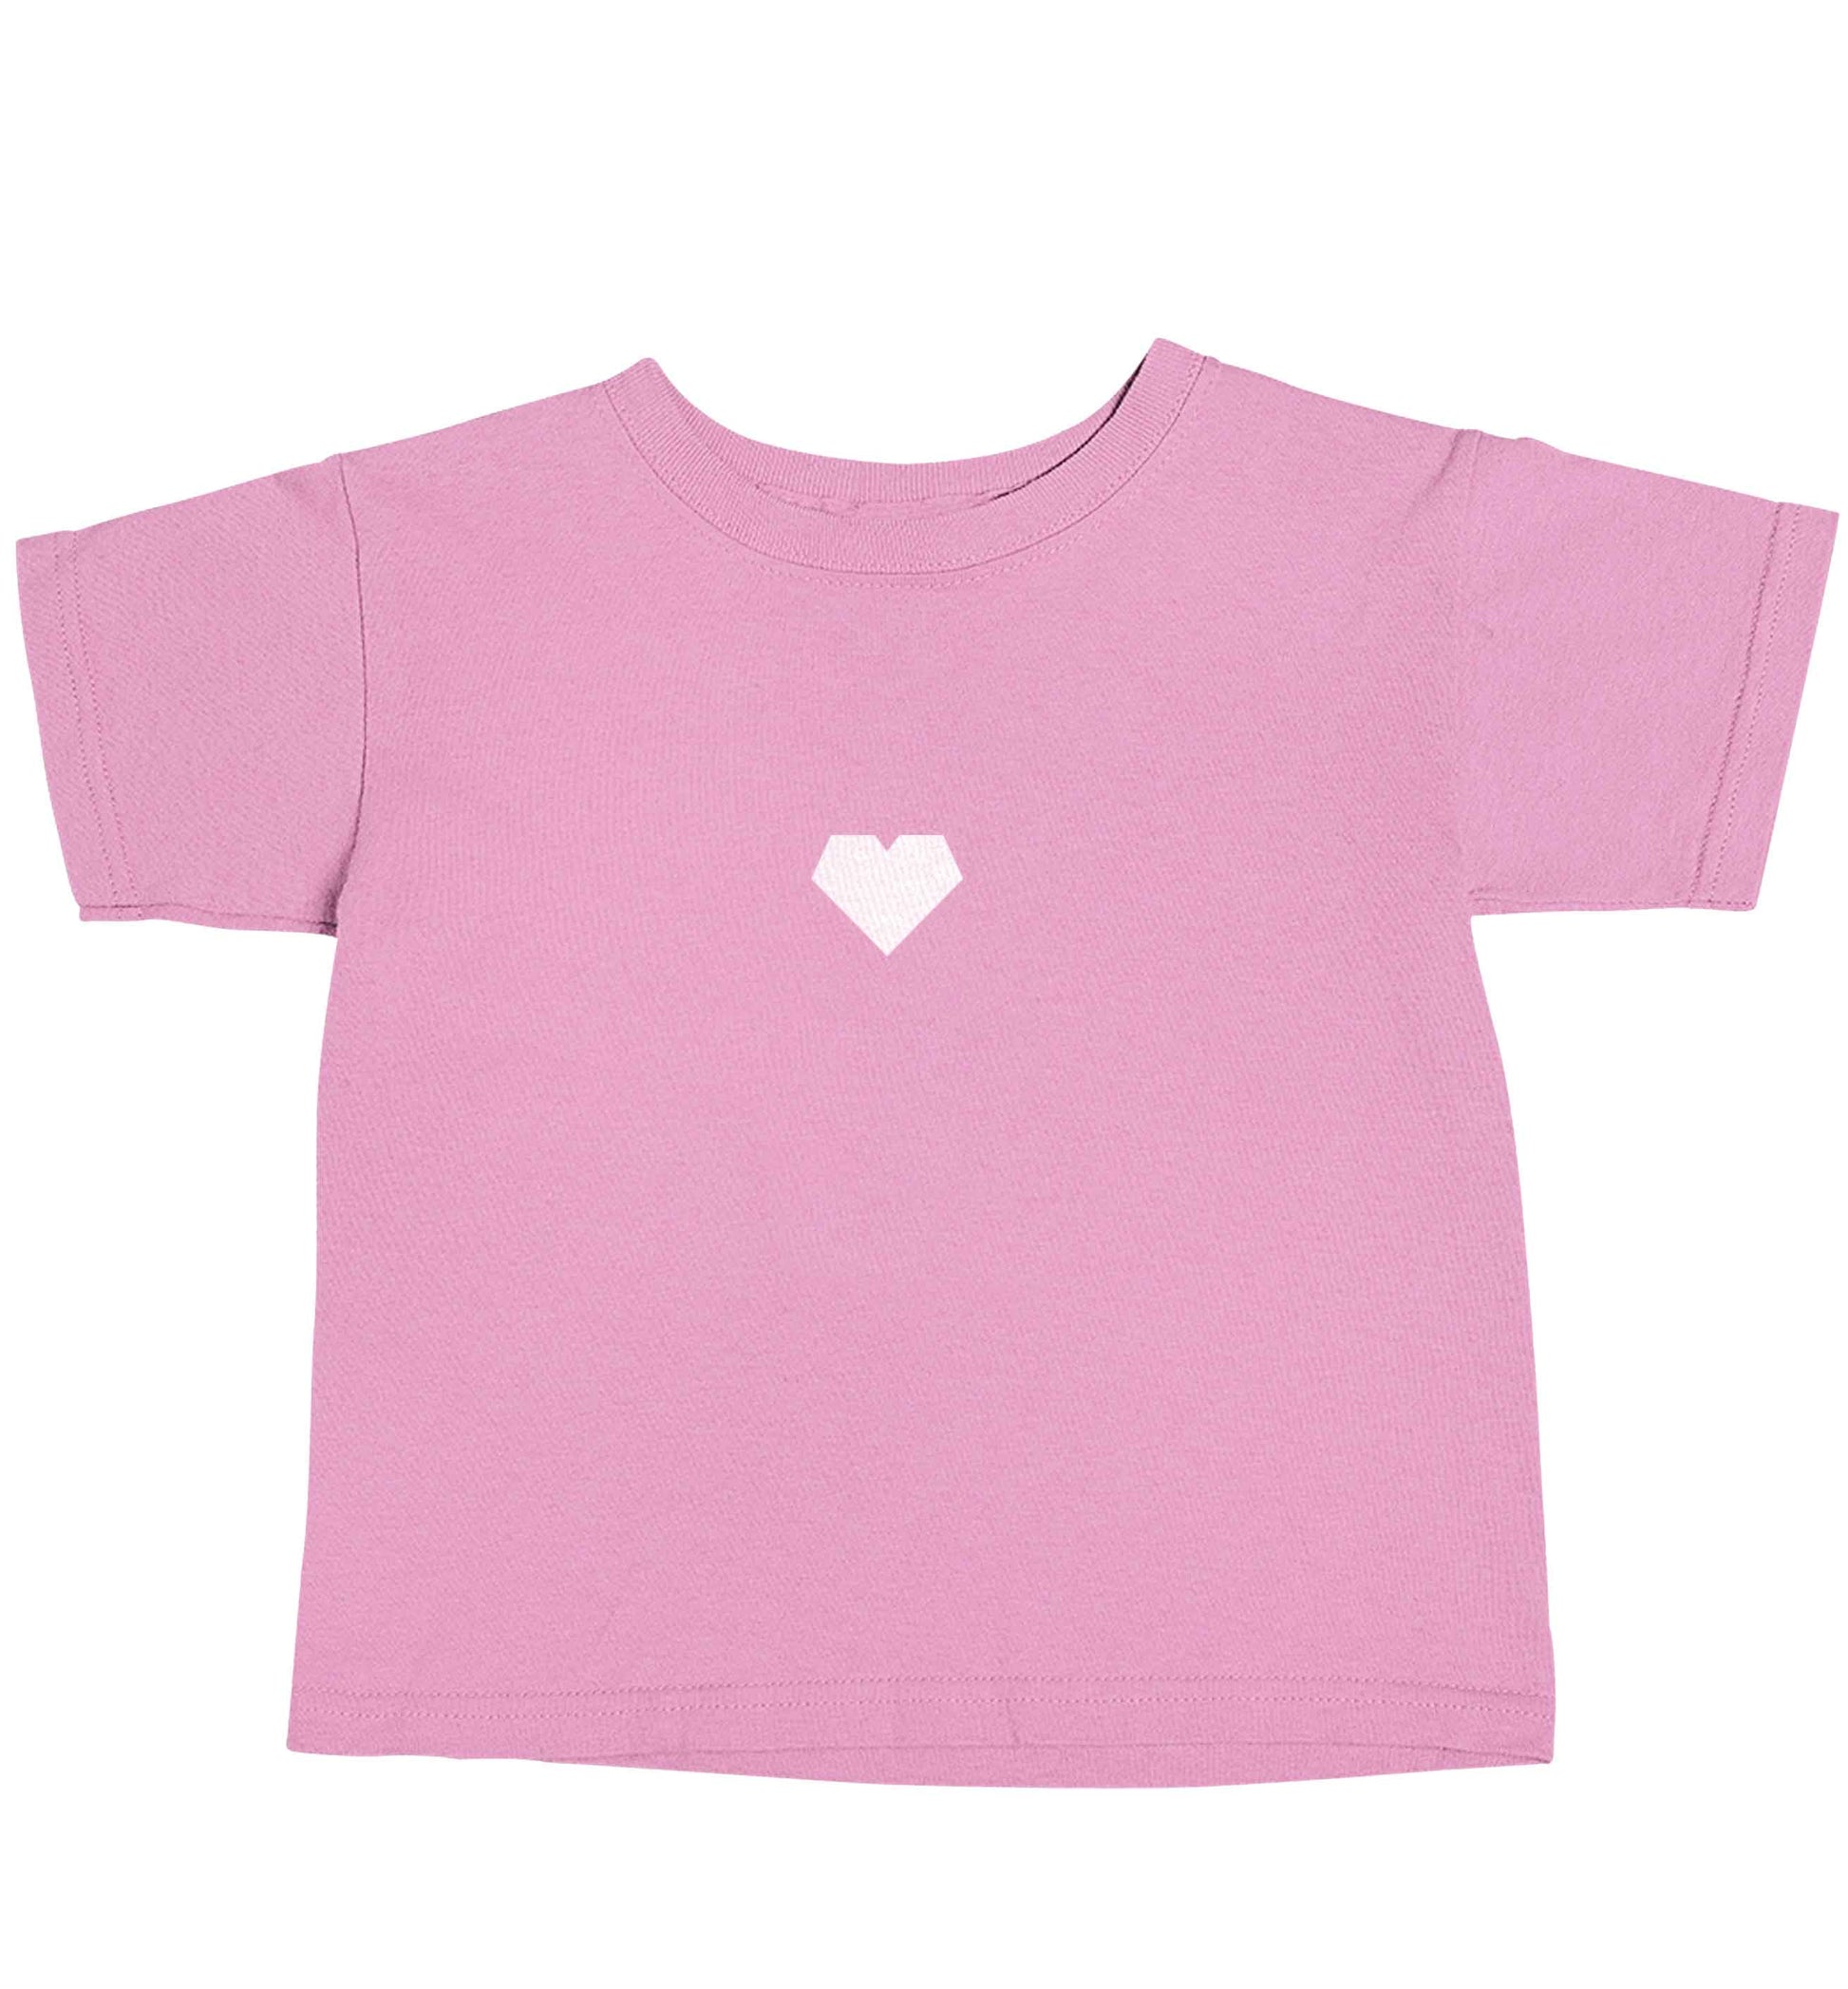 Tiny heart light pink baby toddler Tshirt 2 Years